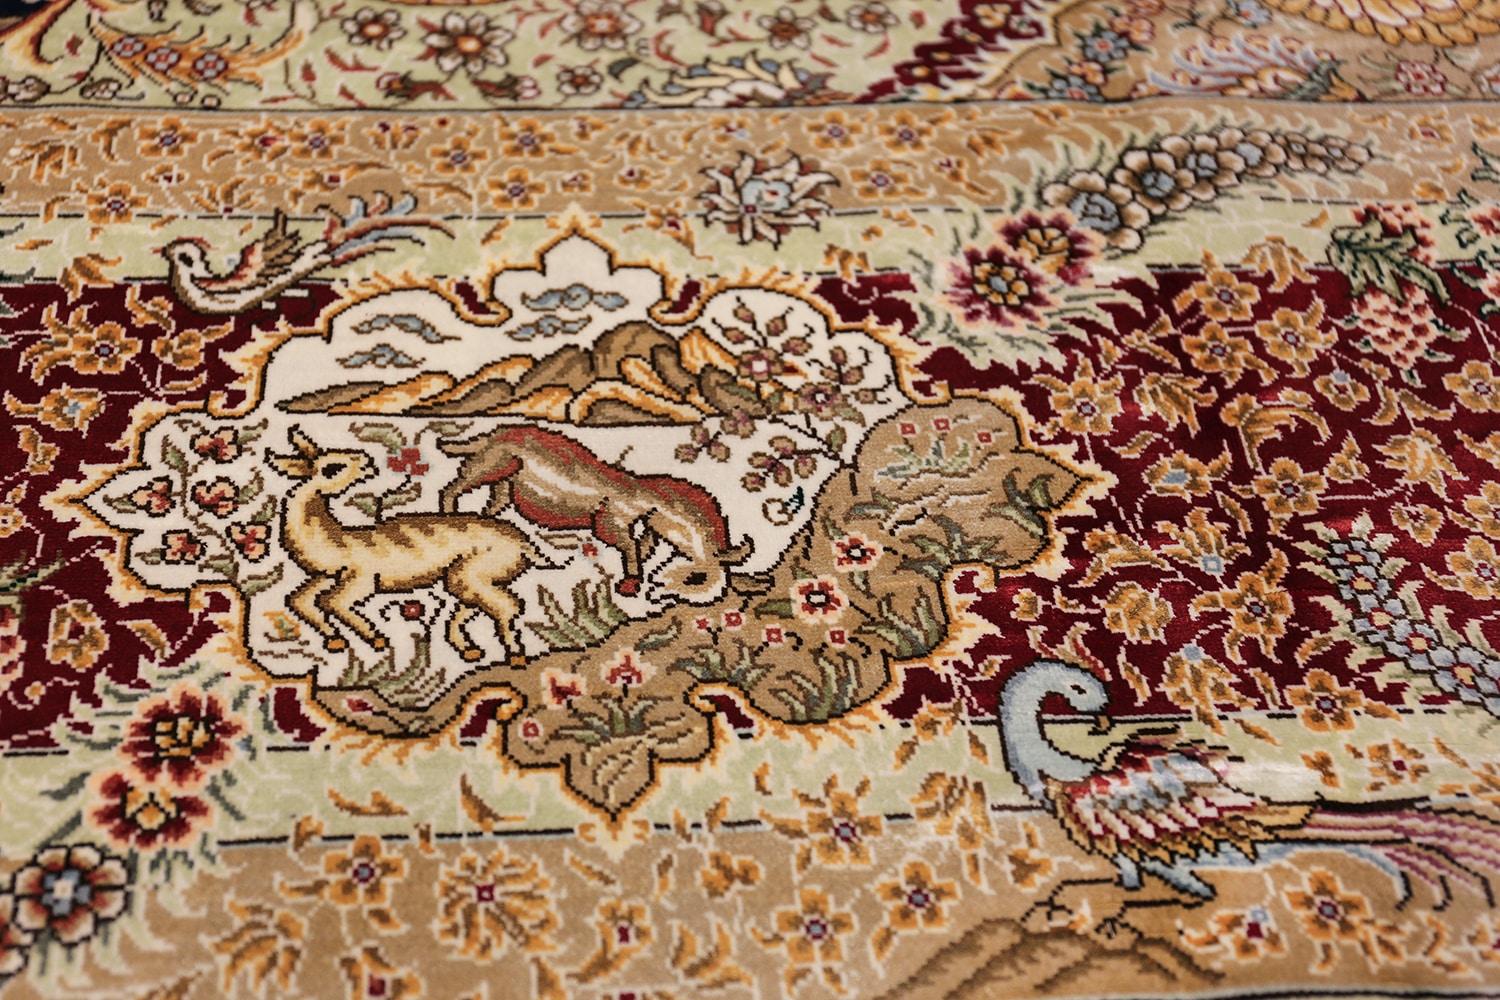 Silk Modern Chinese Rug. 9 ft x 11 ft 9 in (2.74 m x 3.58 m) For Sale 4